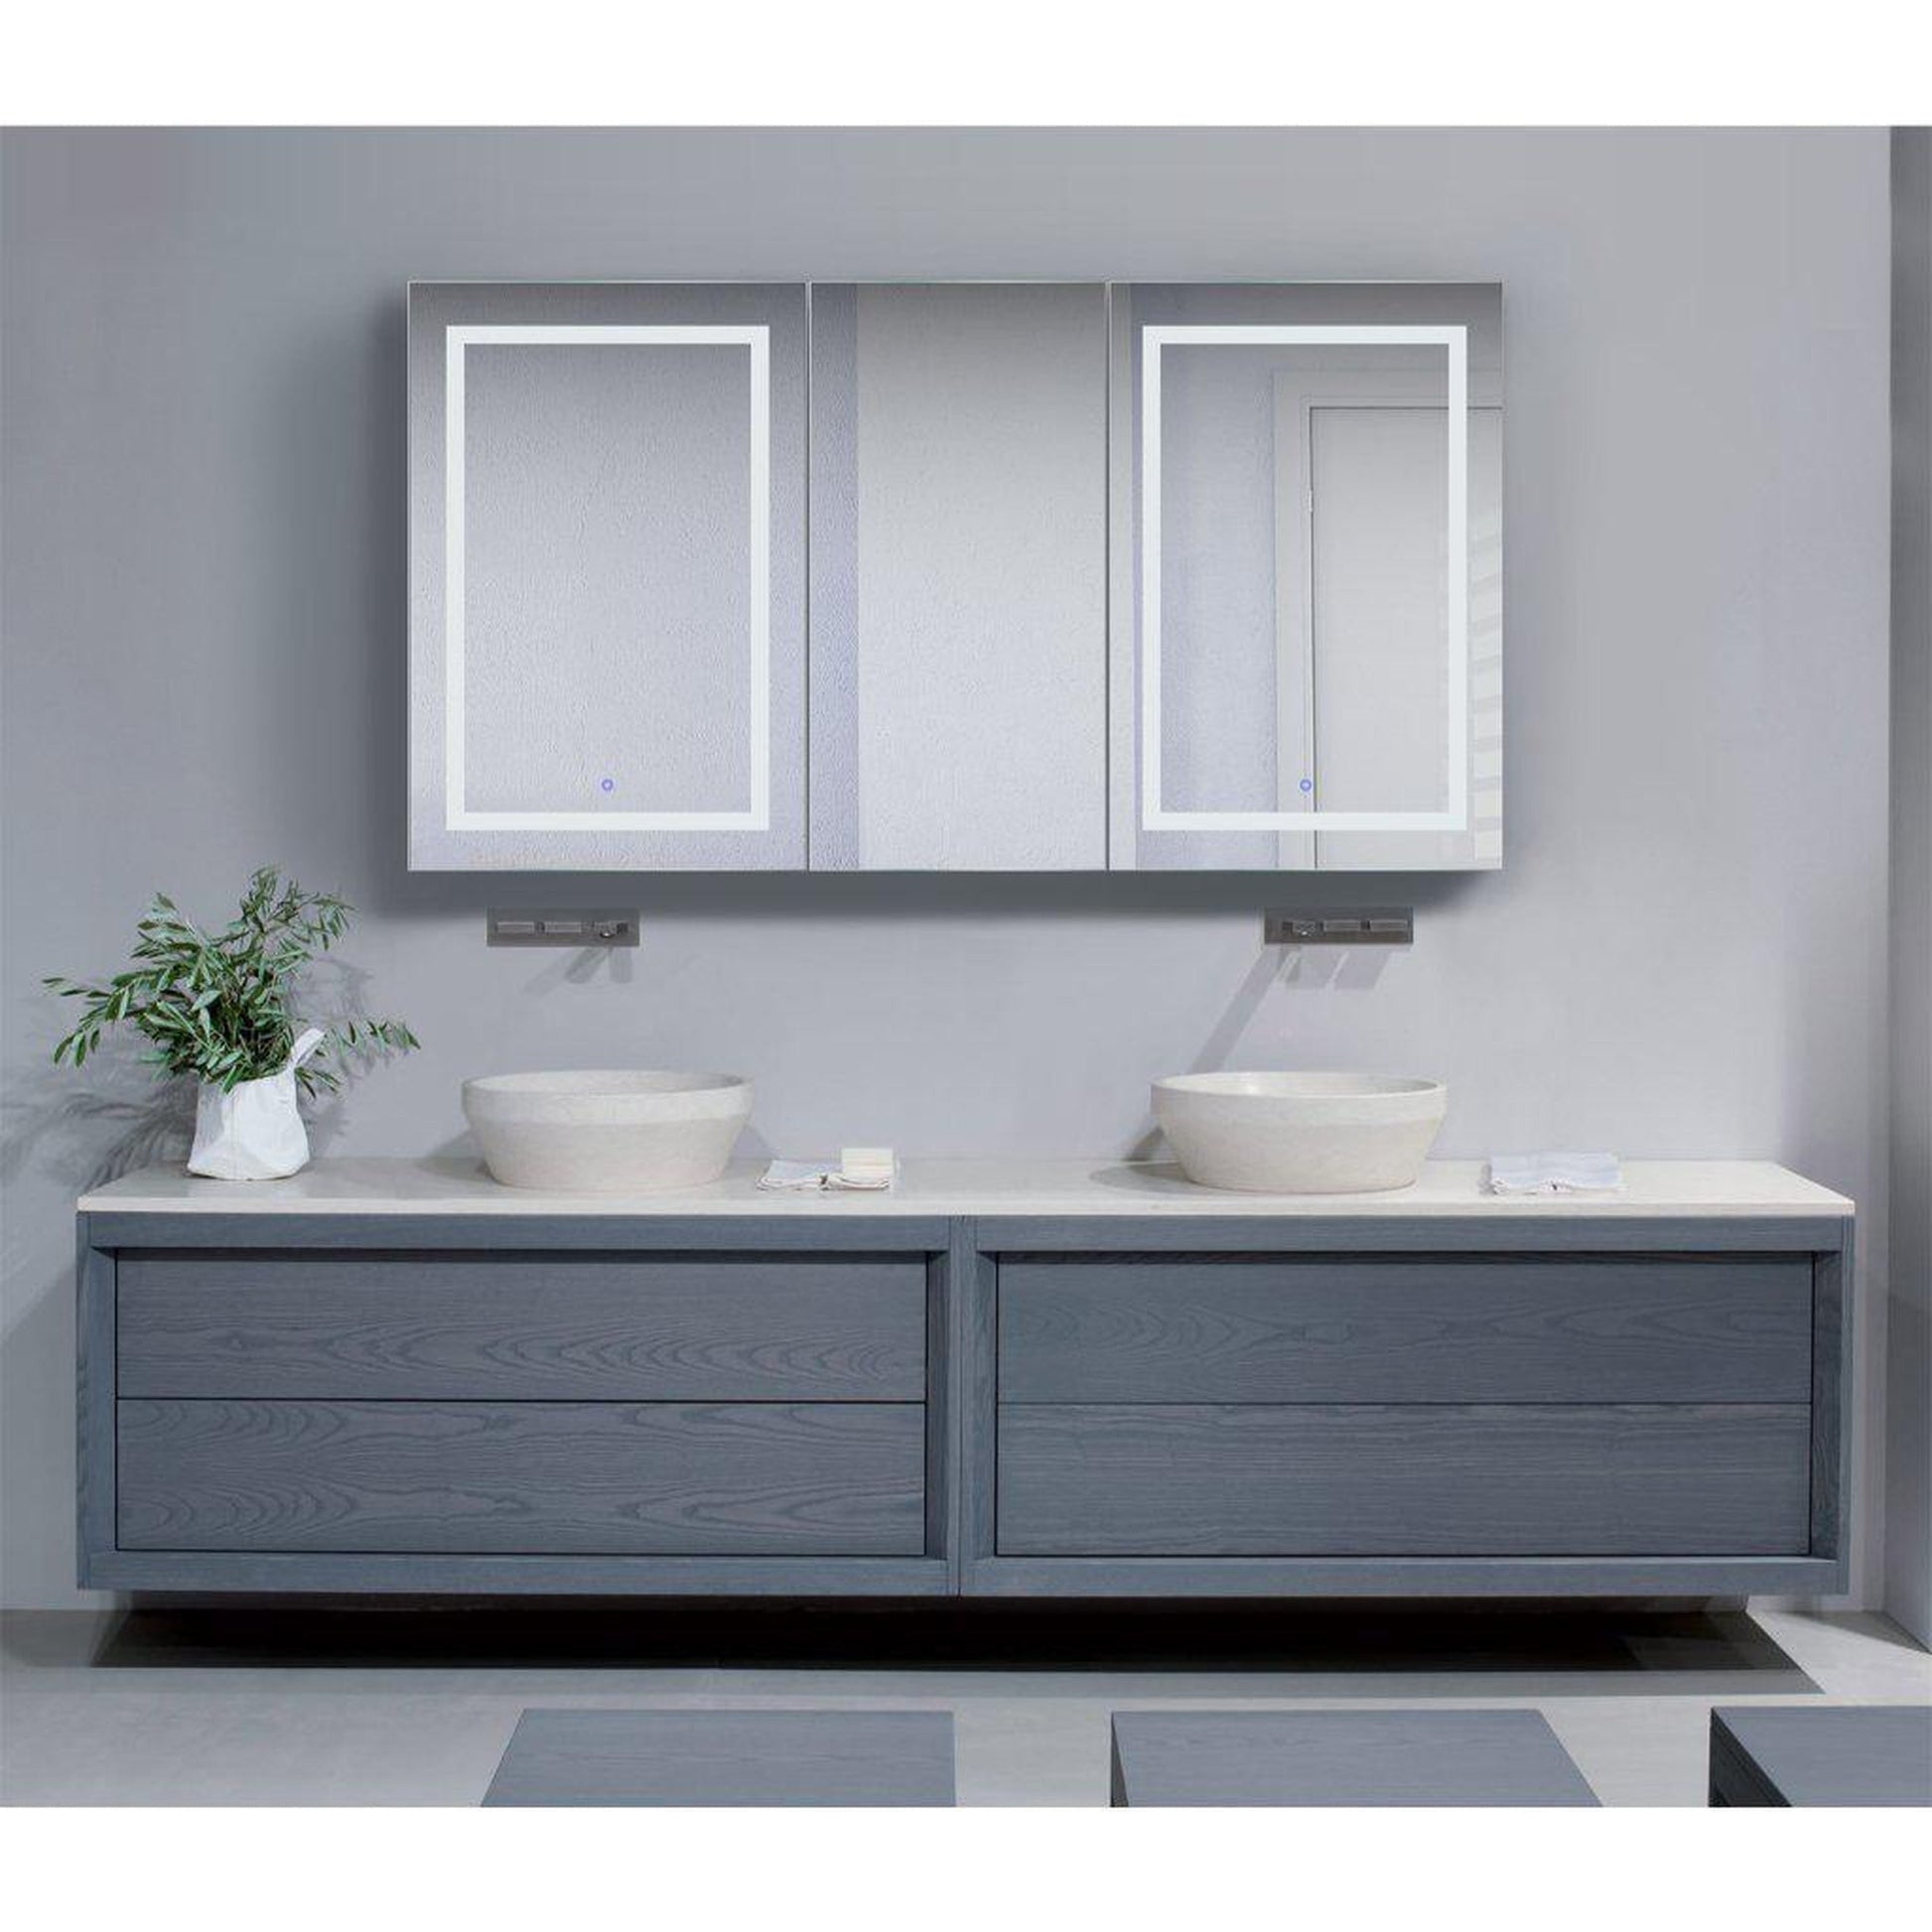 Krugg Reflections Svange 66" x 36" 5000K Double Tri-View Left-Left-Right Opening Recessed/Surface-Mount Illuminated Silver Backed LED Medicine Cabinet Mirror With Built-in Defogger, Dimmer and Electrical Outlet